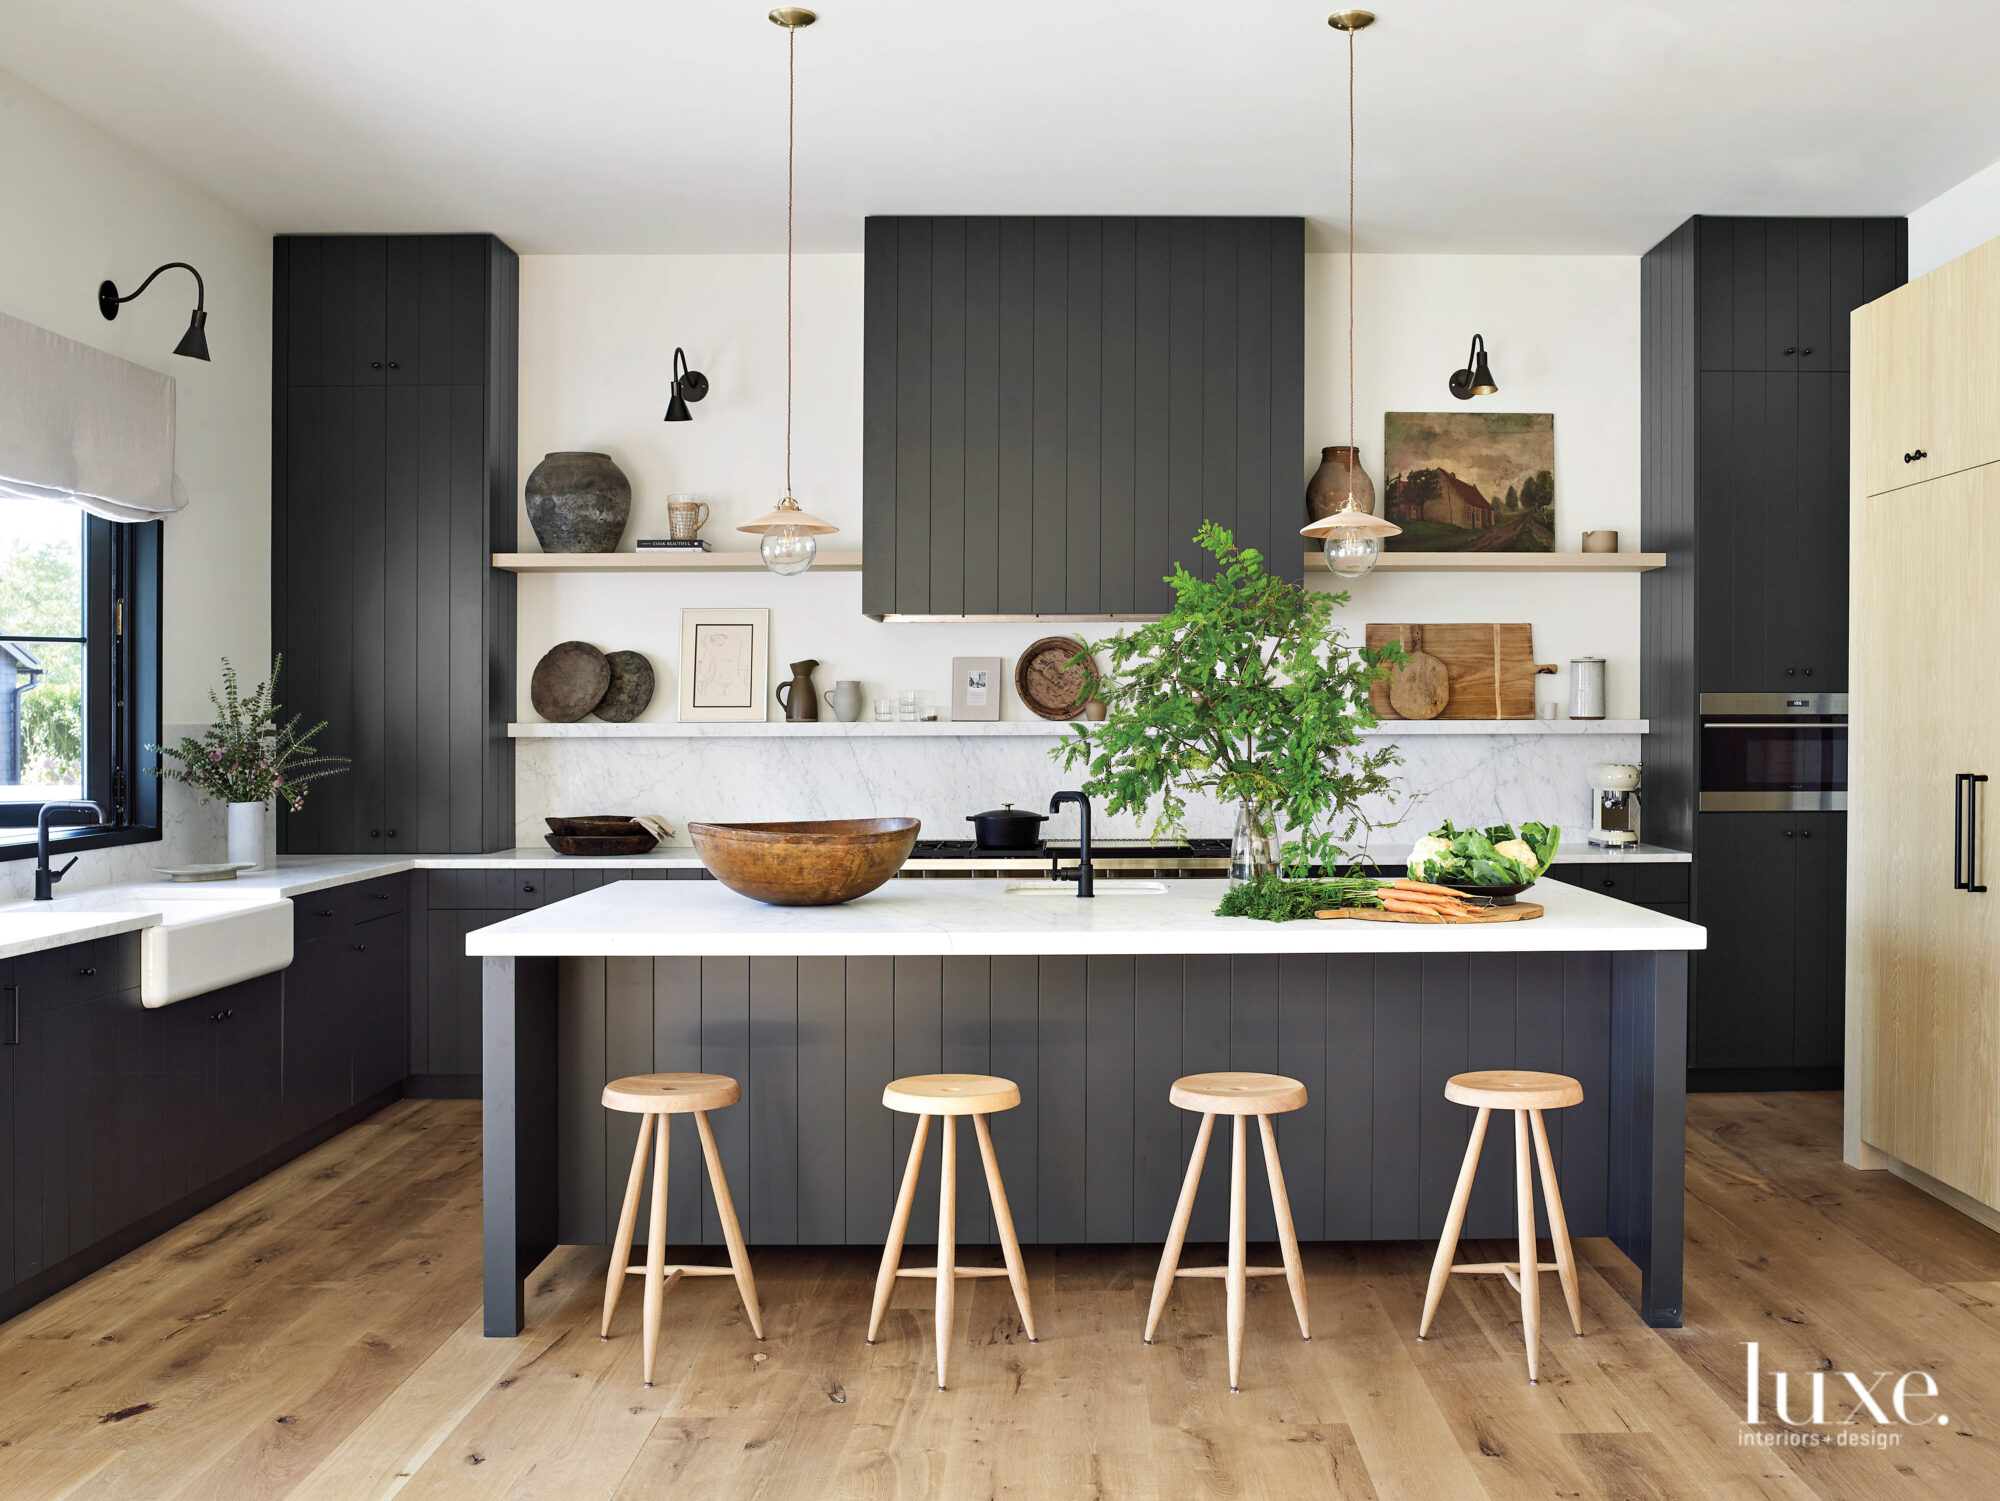 Small barstools sit in a kitchen defined by black cabinetry